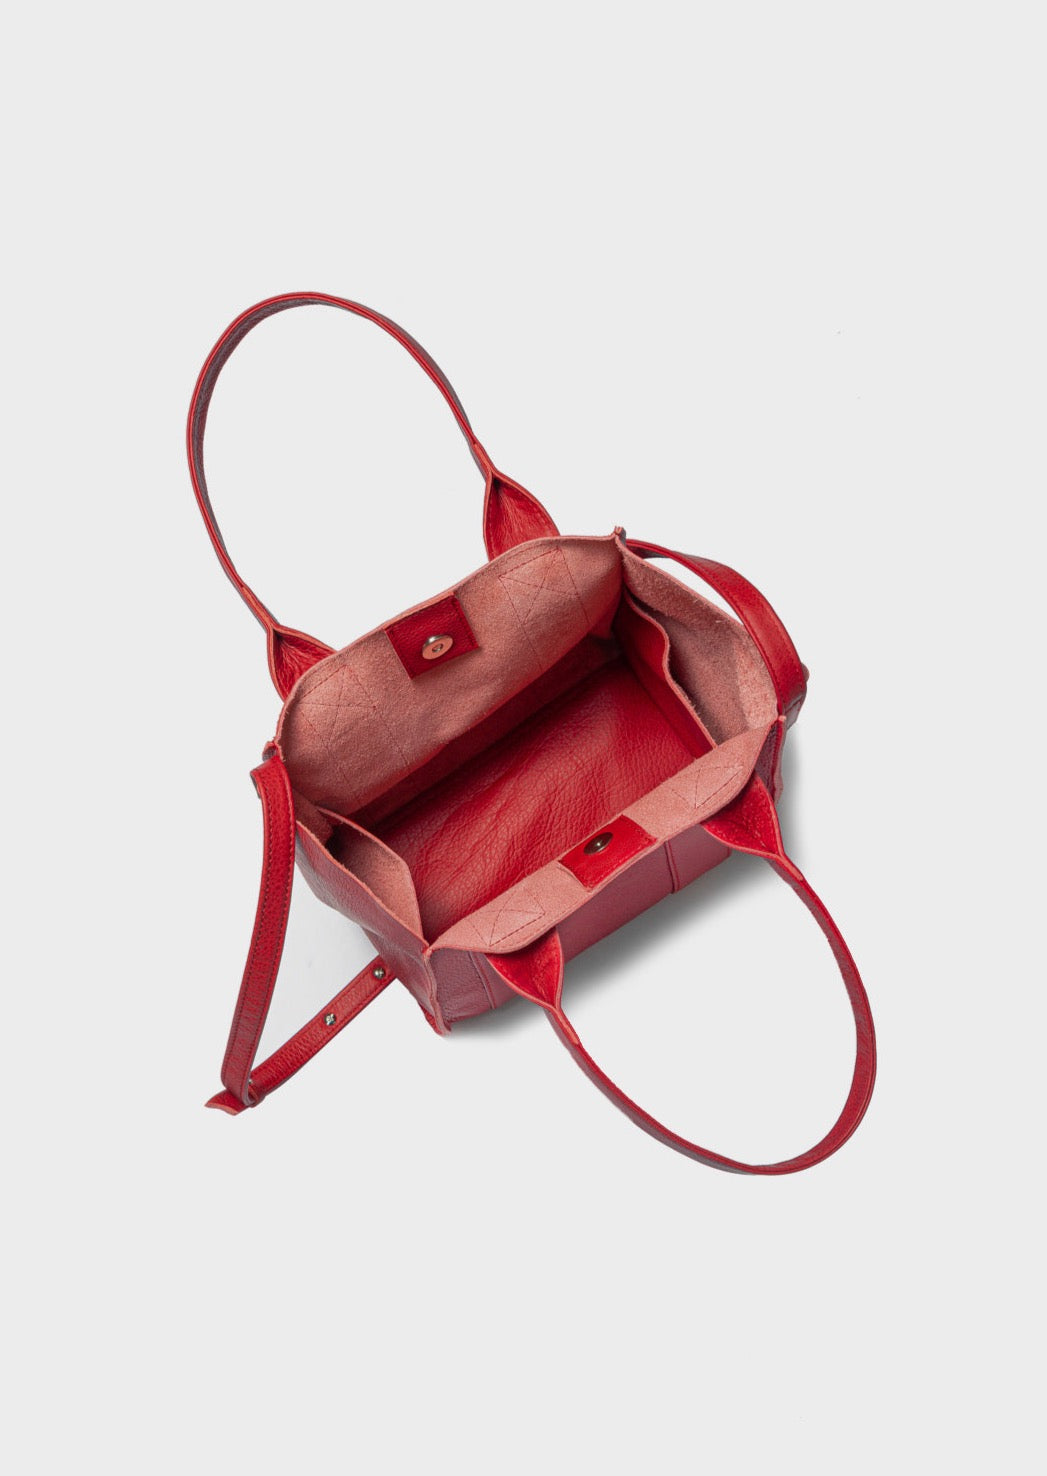 THE SMALL BAG RED